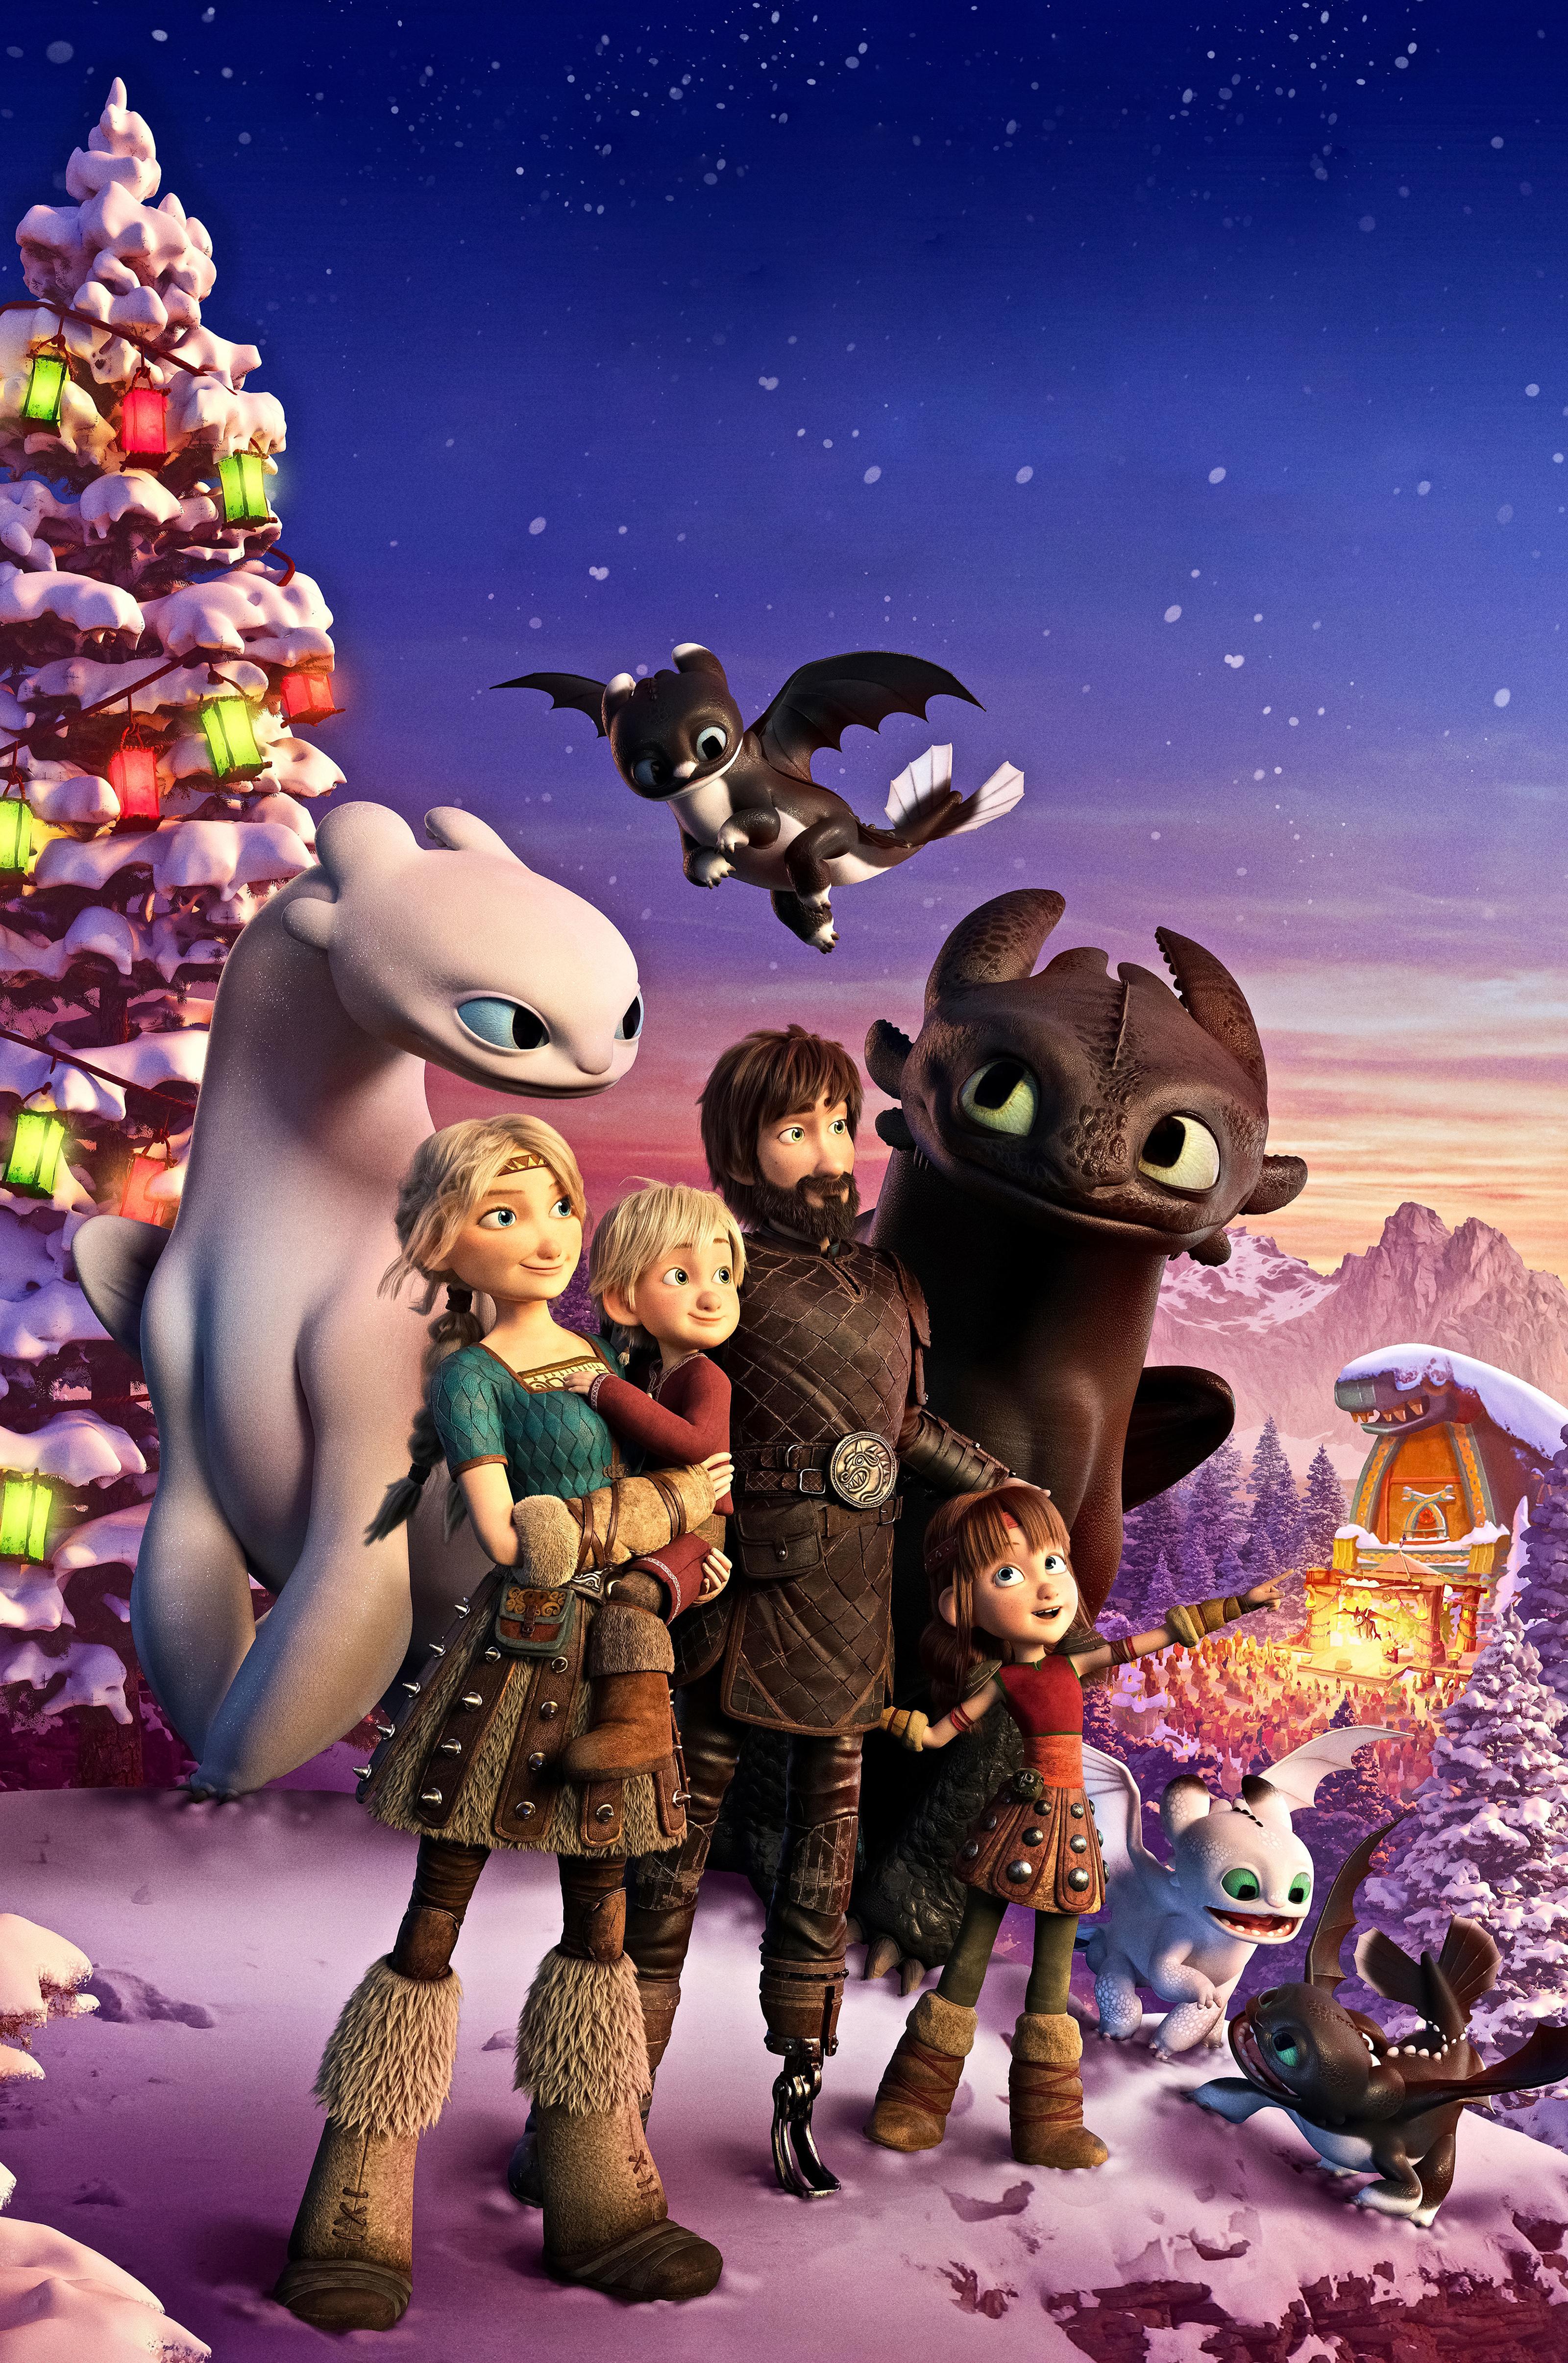 Wallpaper How to Train Your Dragon Homecoming, Hiccup